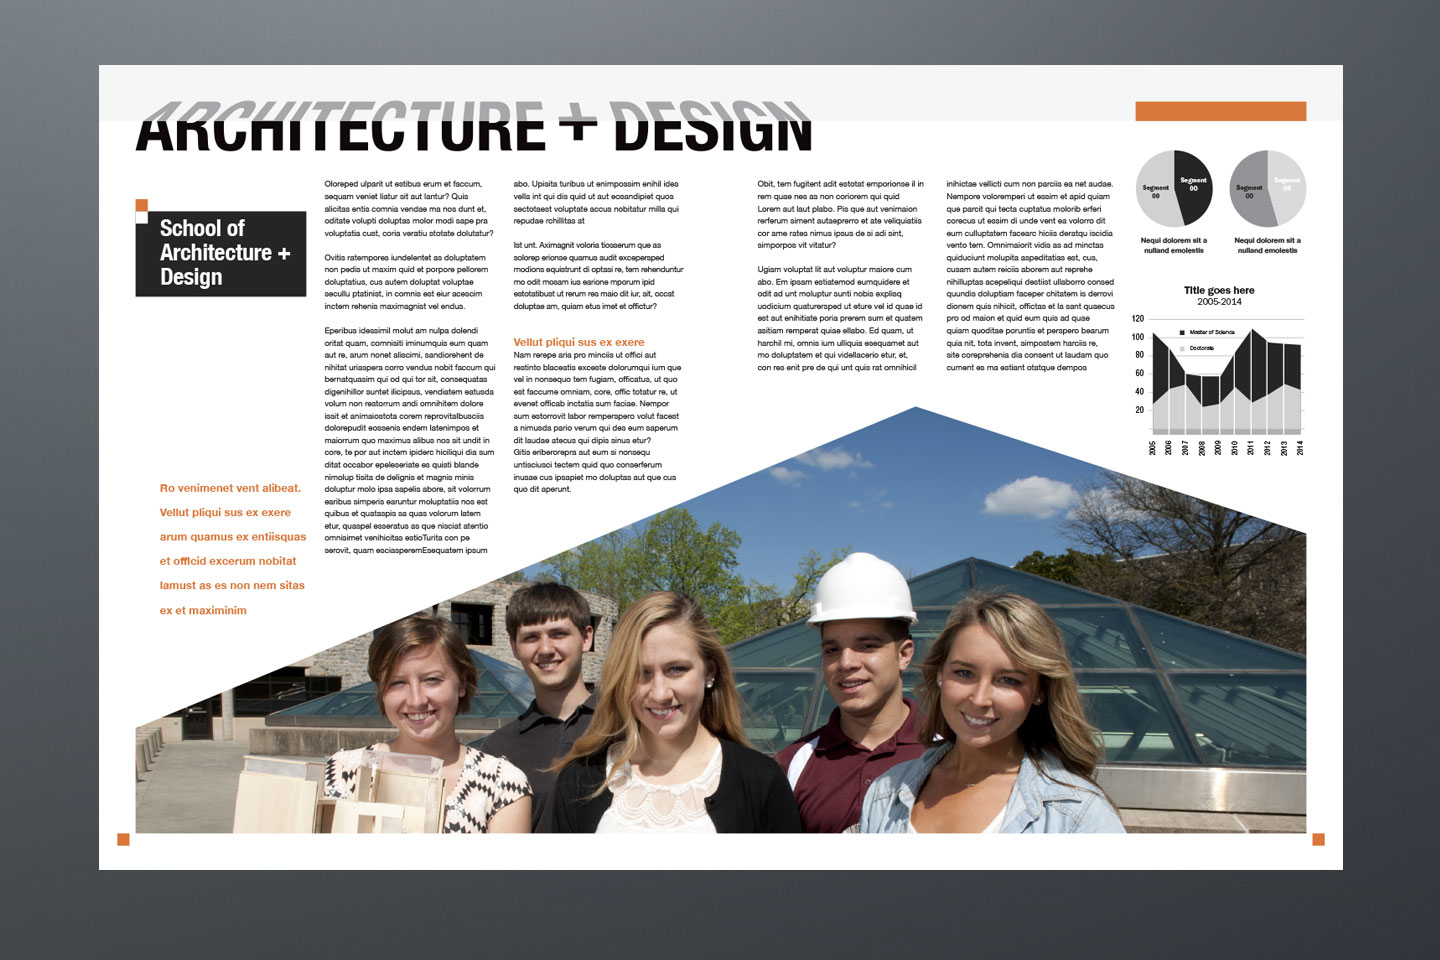 Virginia Tech College of Architecture and Urban Studies